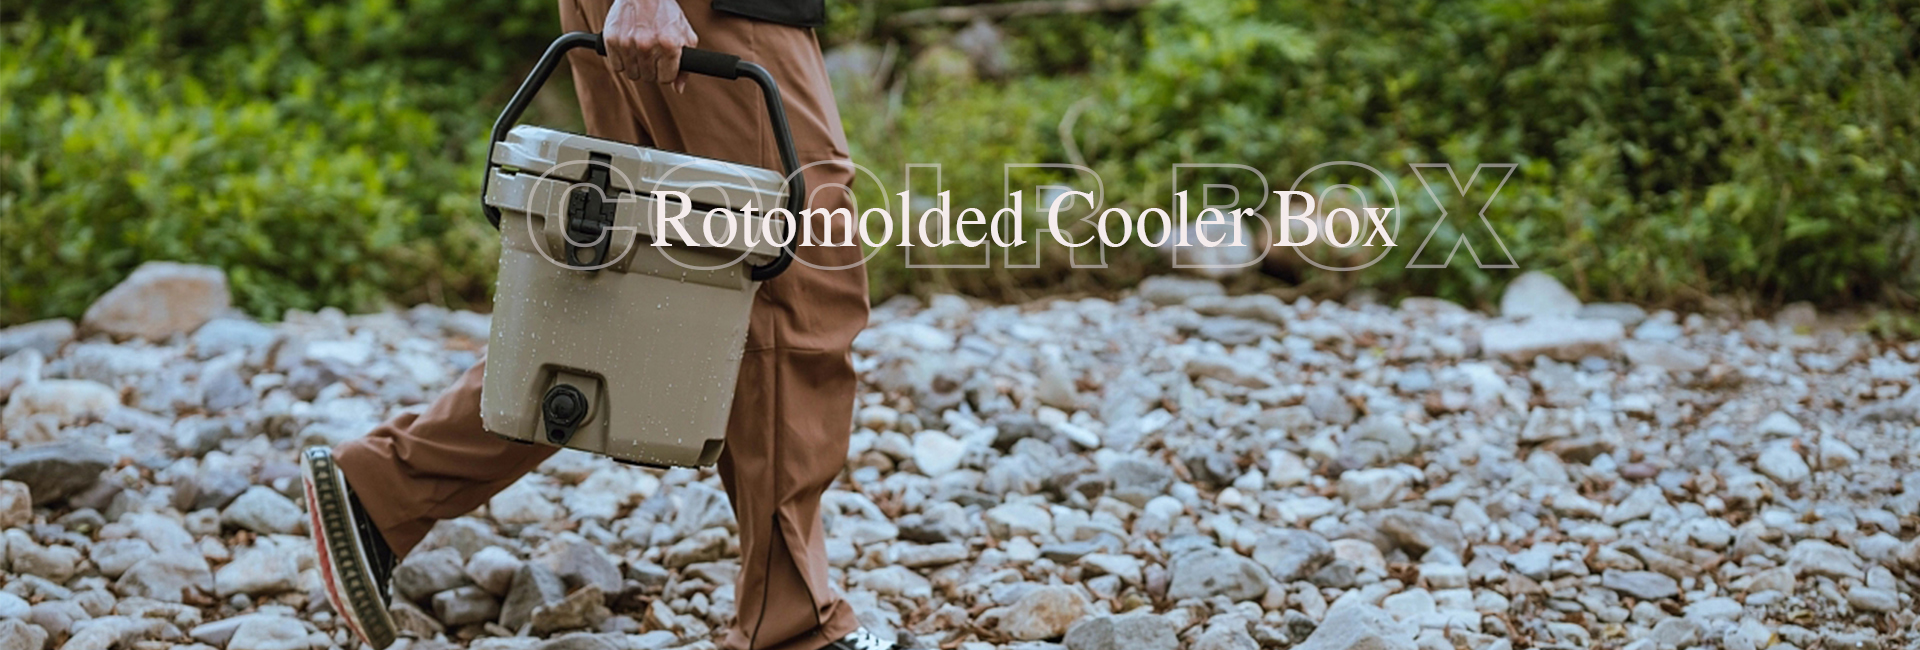 rotomolded cooler 